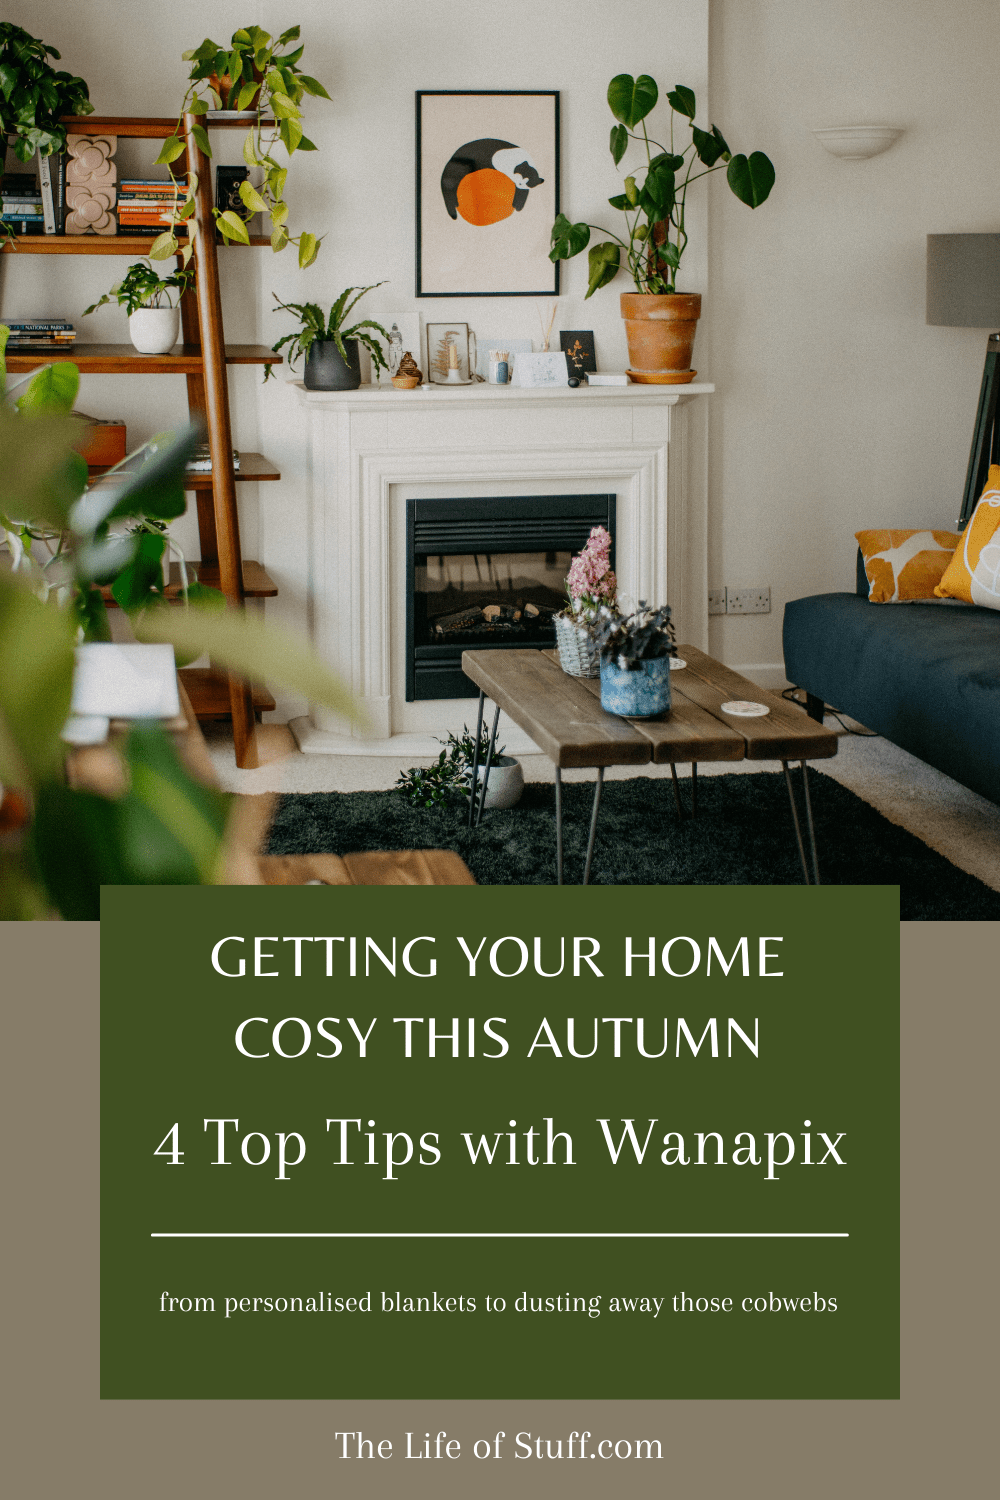 Getting Your Home Cosy This Autumn - 4 Top Tips with Wanapix - The Life of Stuff